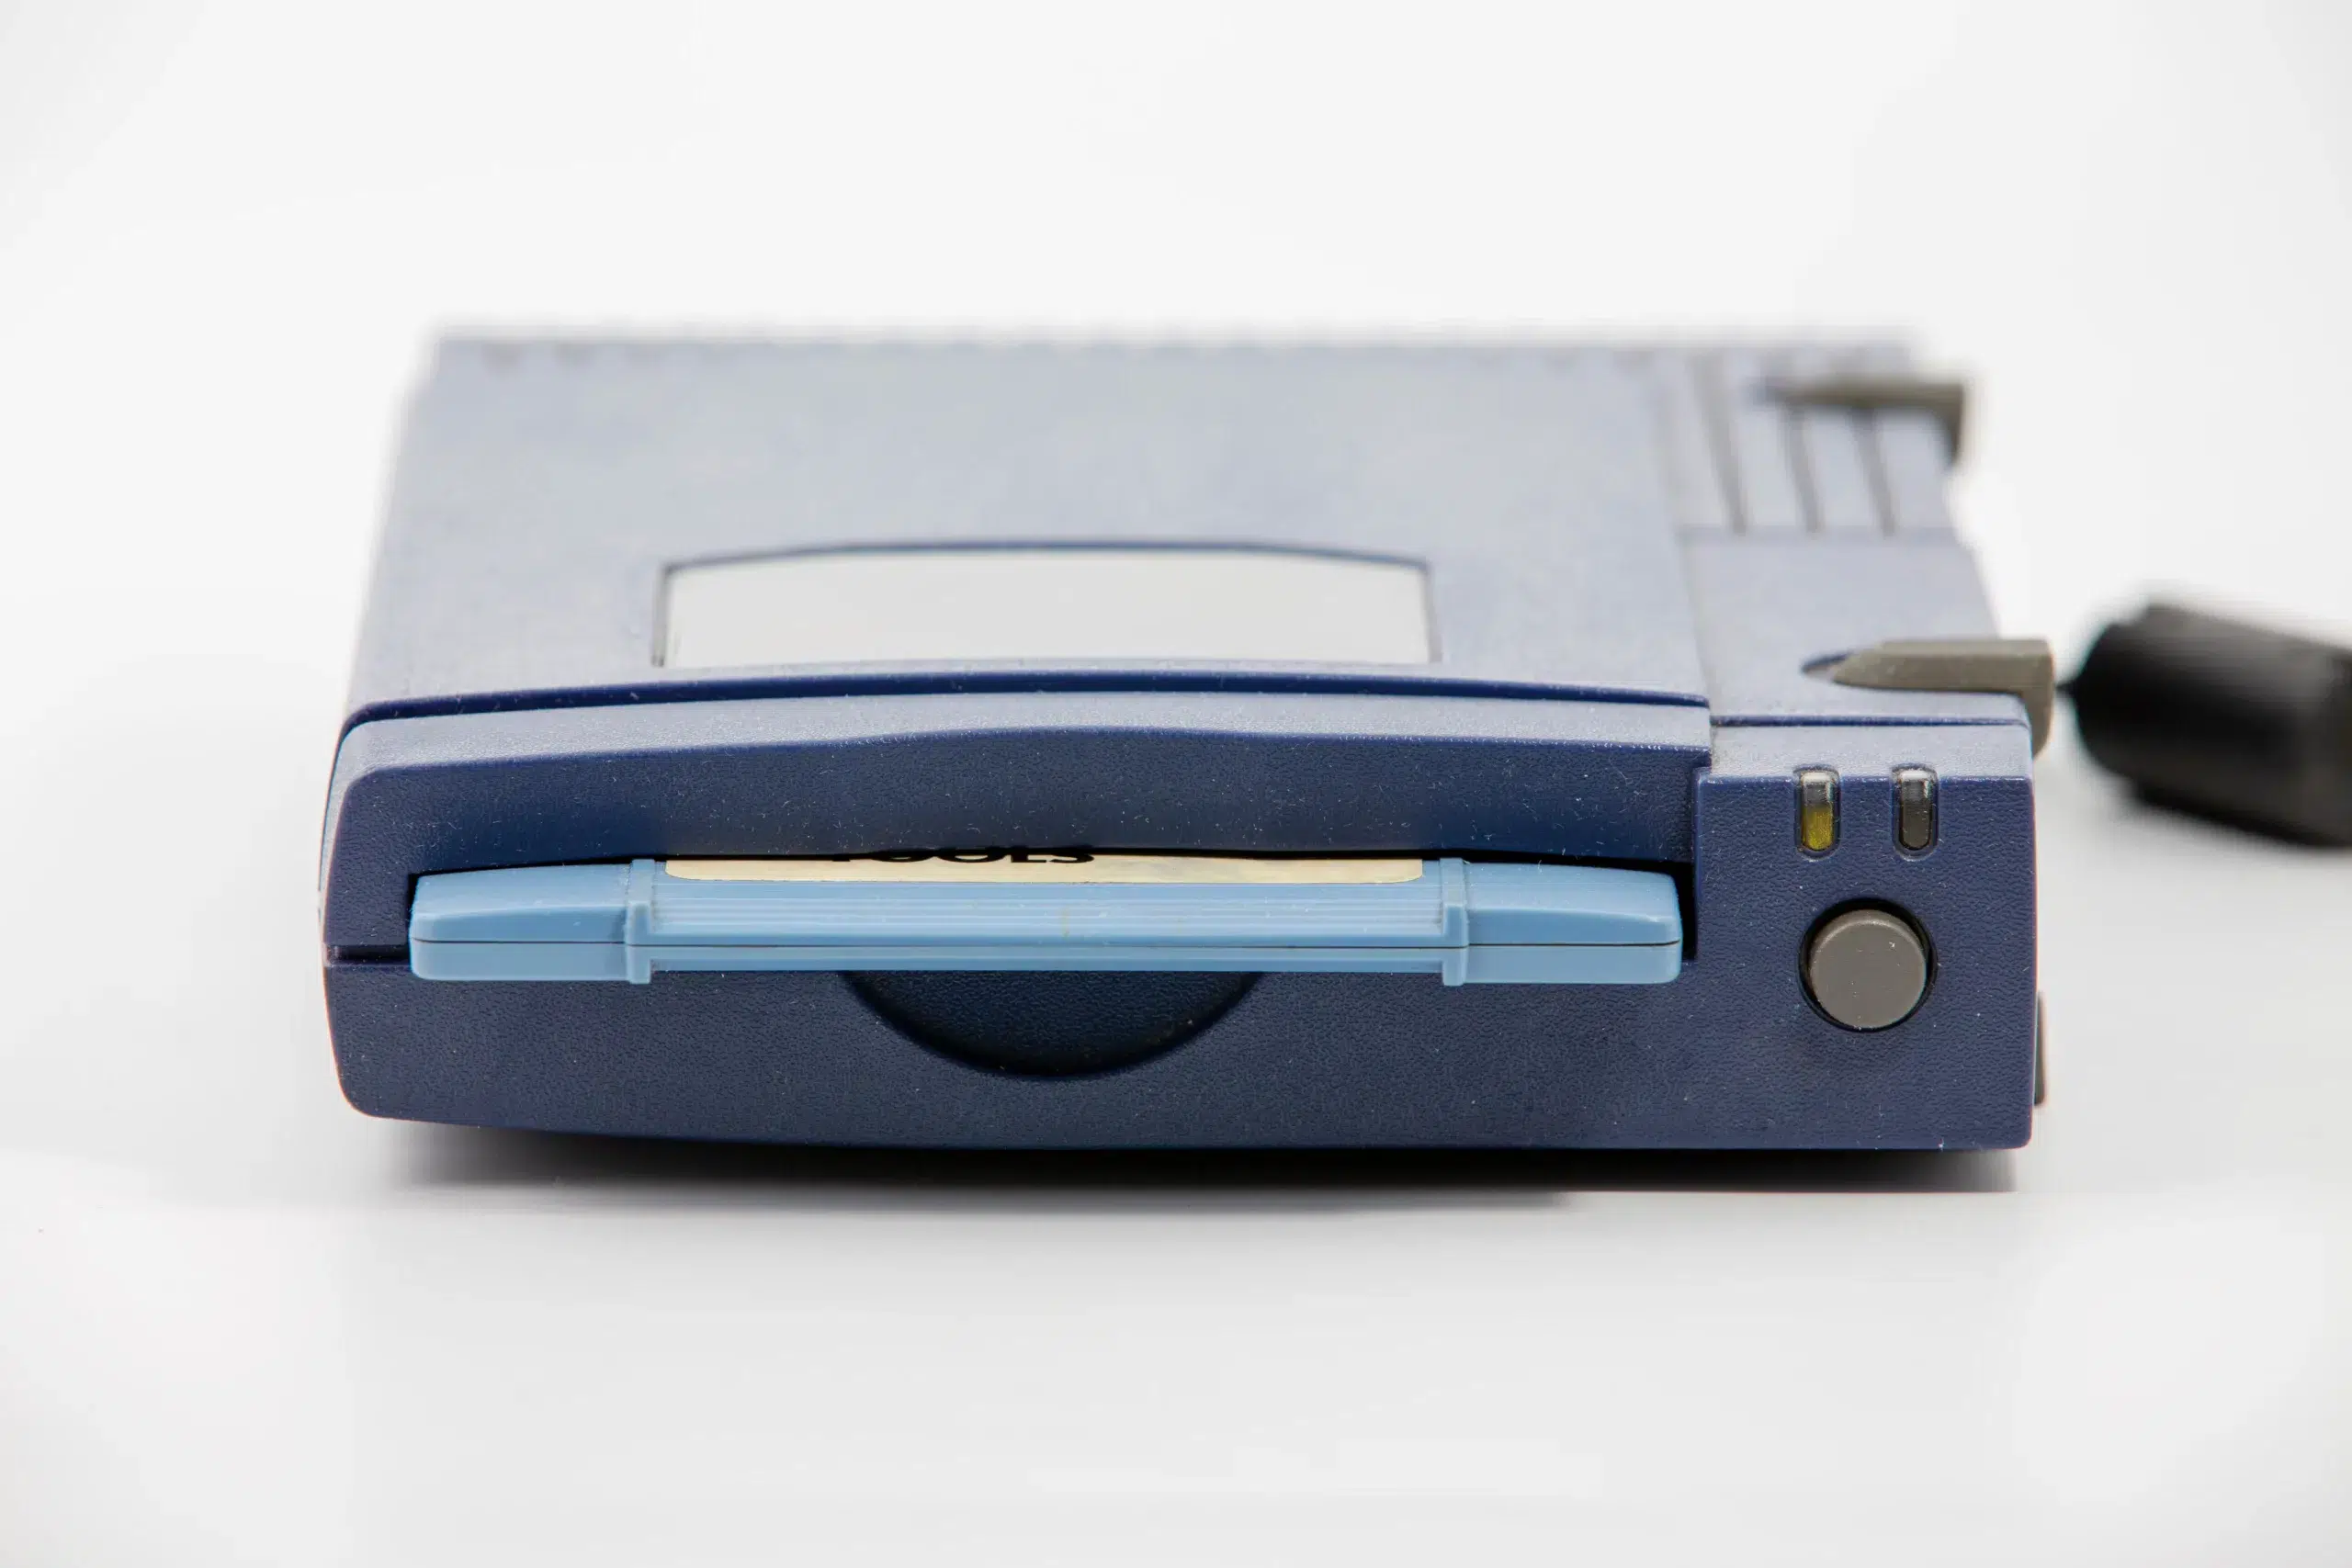 zip drive with blue disk inserted over white background